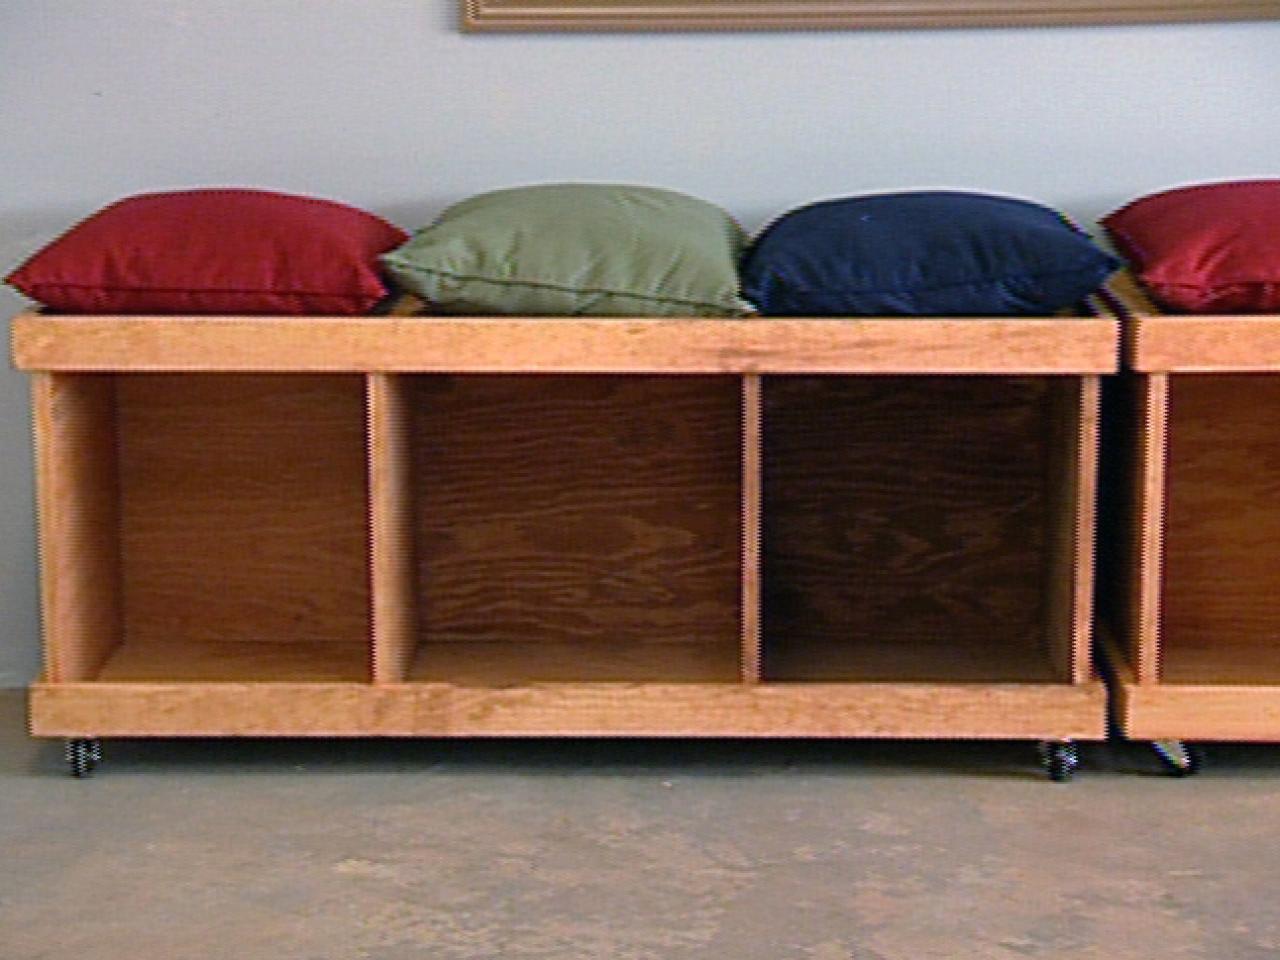 How To Build A Rolling Storage Bench - Bench Seat With Storage Plans